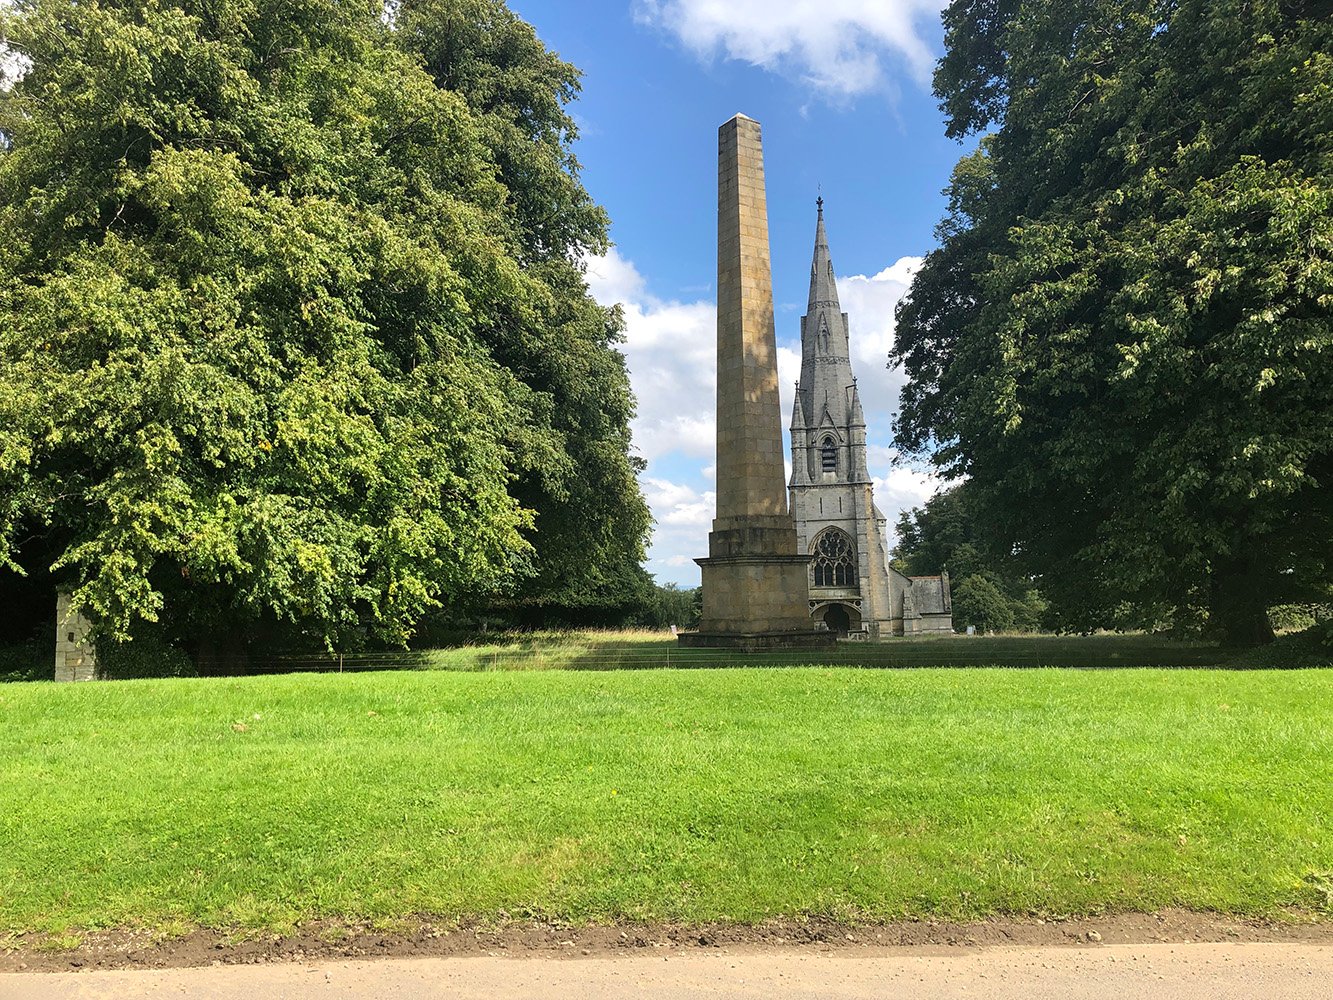 Image name obelisk and church studley royal fountains abbey north yorkshire the 8 image from the post A look at the history of Studley Royal, North Yorkshire, with Dr Emma Wells in Yorkshire.com.